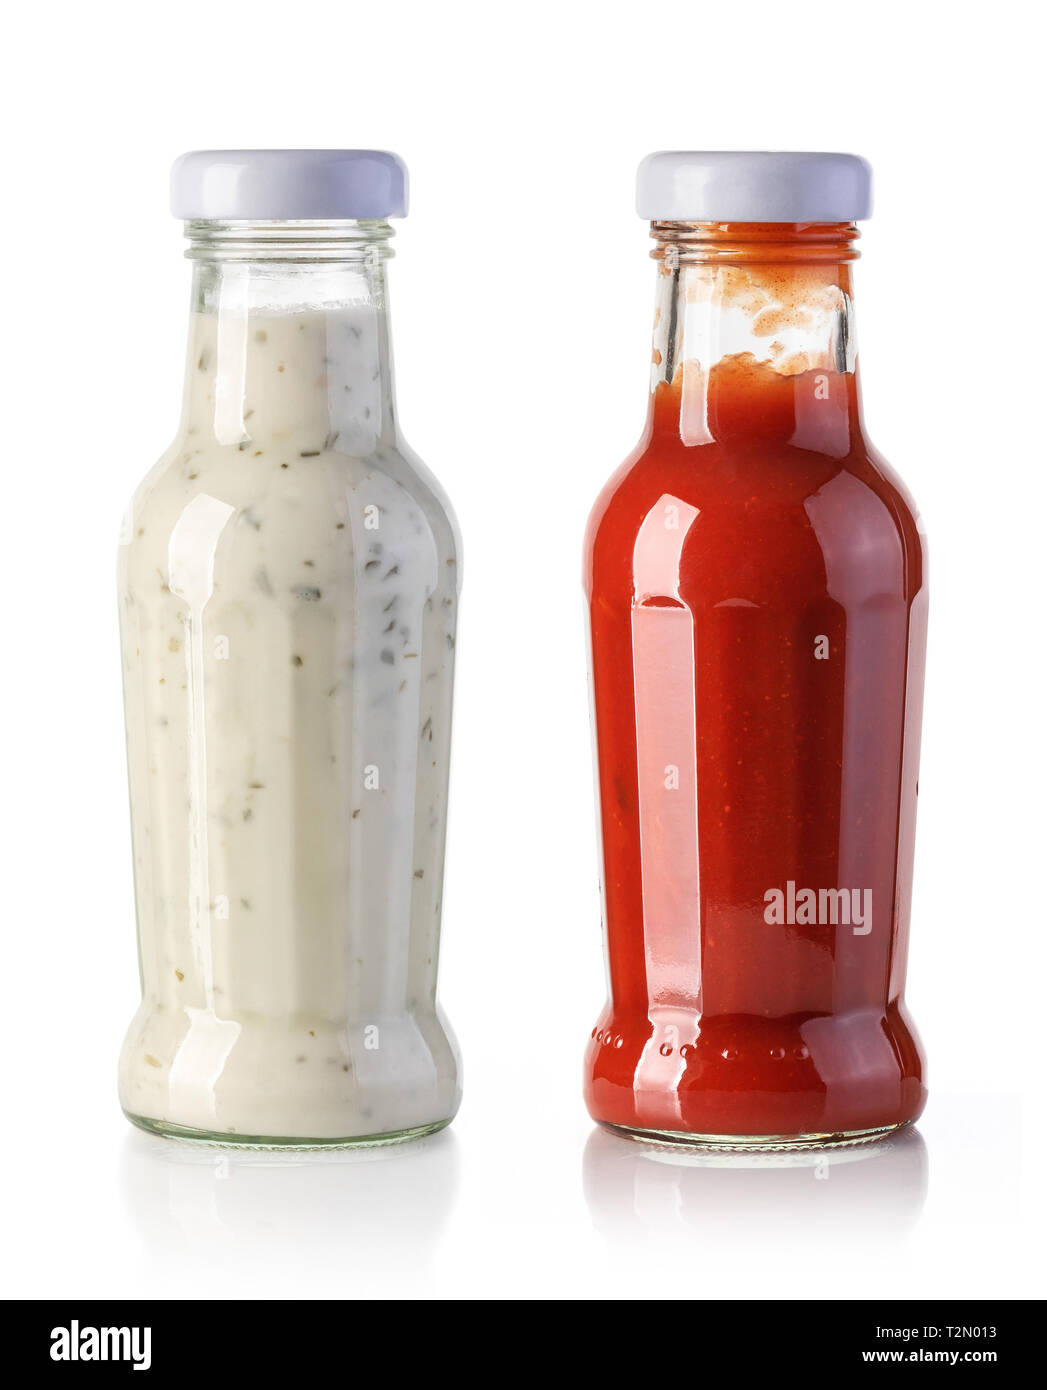 https://c8.alamy.com/comp/T2N013/ketchup-and-tartar-sauce-bottles-isolated-on-a-white-background-T2N013.jpg